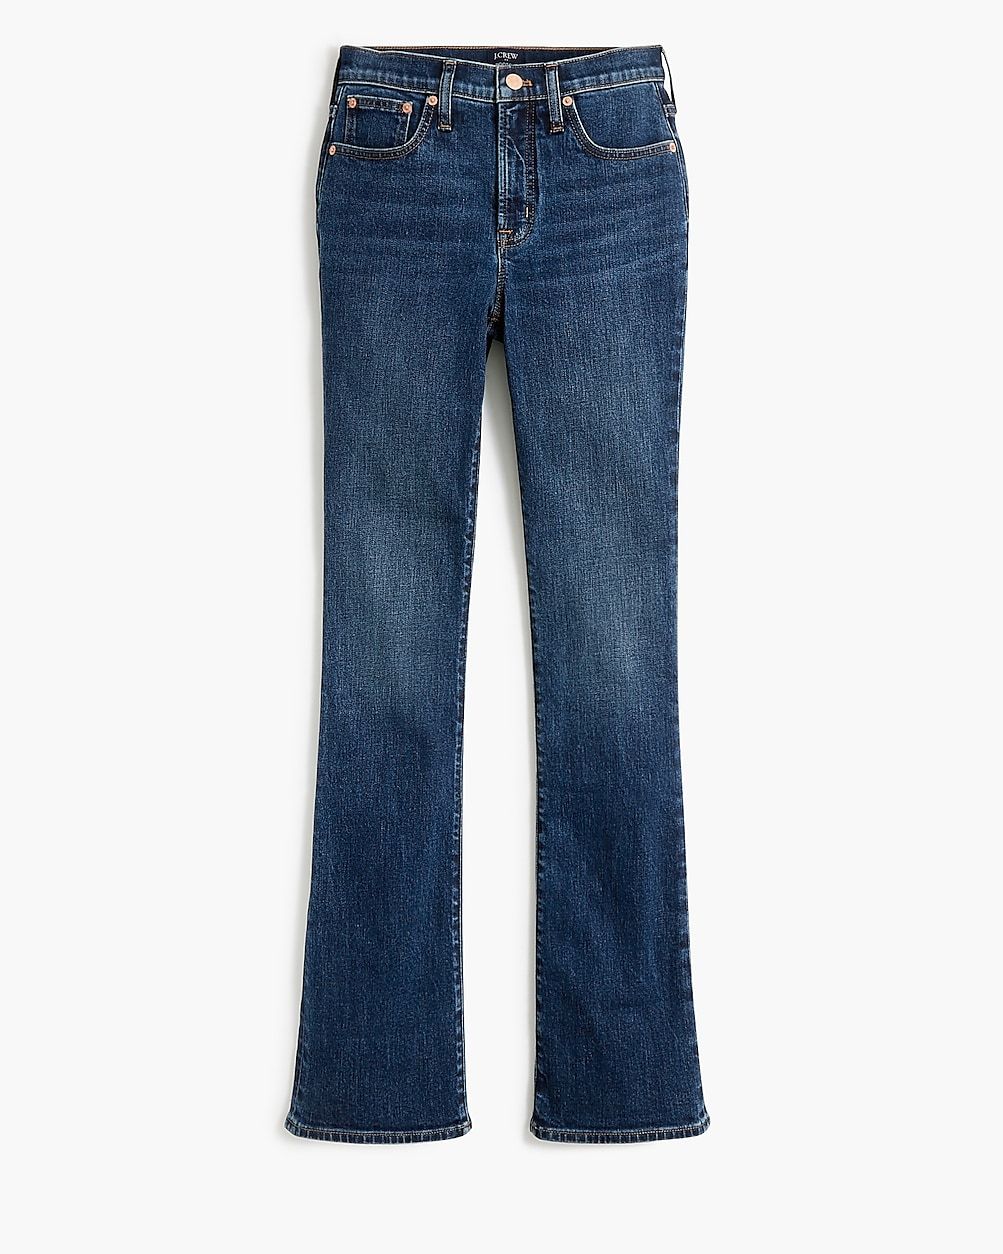 Bootcut jean in all-day stretch | J.Crew Factory